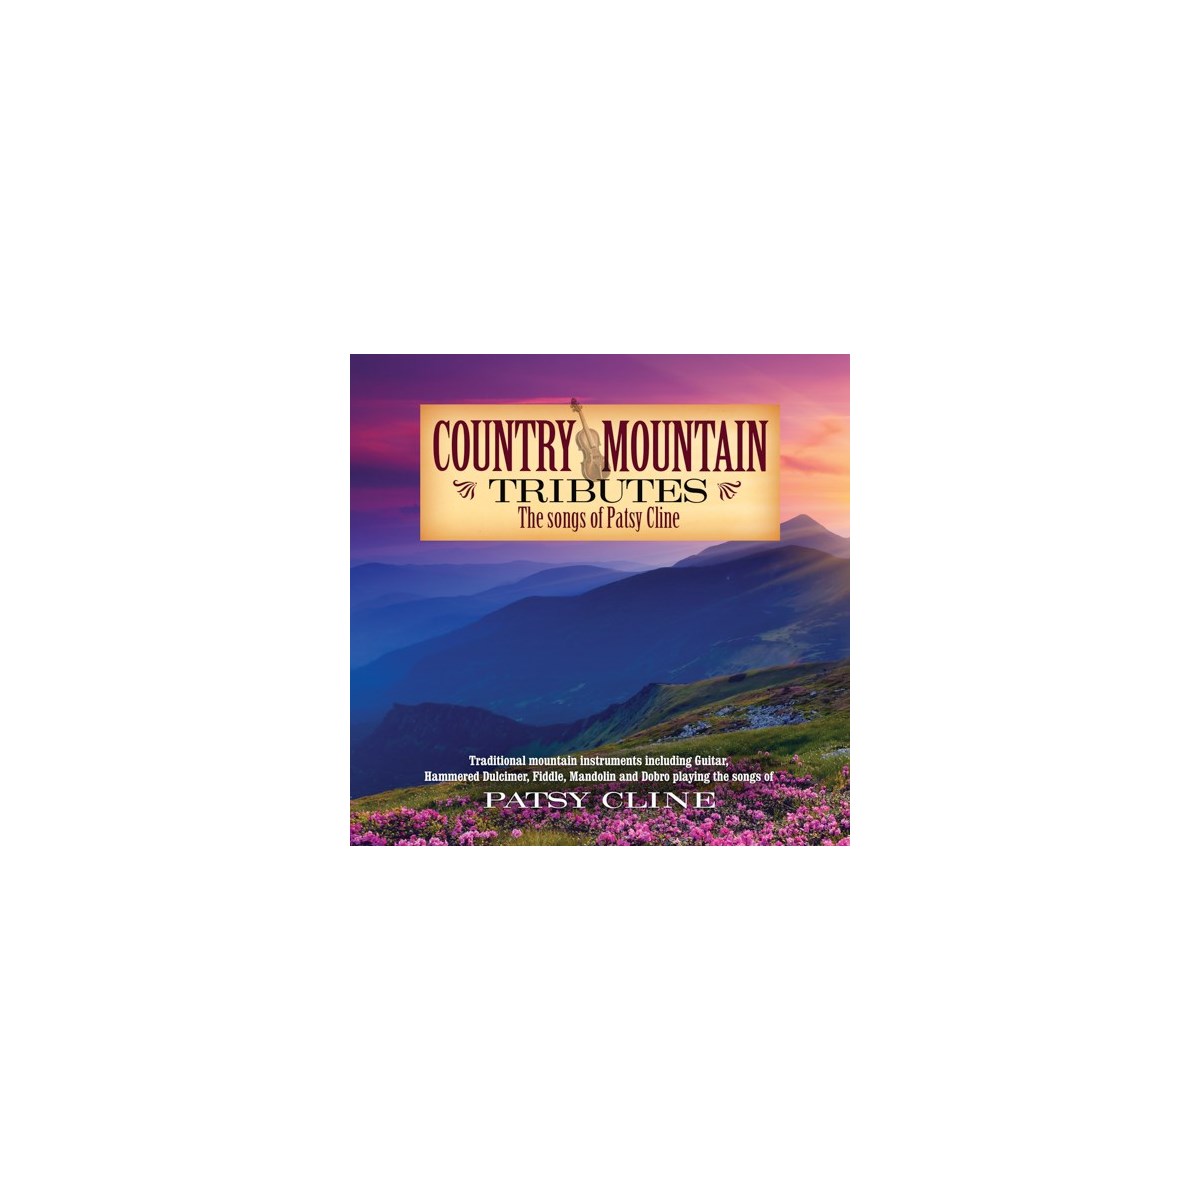 COUNTRY MOUNTAIN TRIBUTES: SONGS OF PATSY CLINE